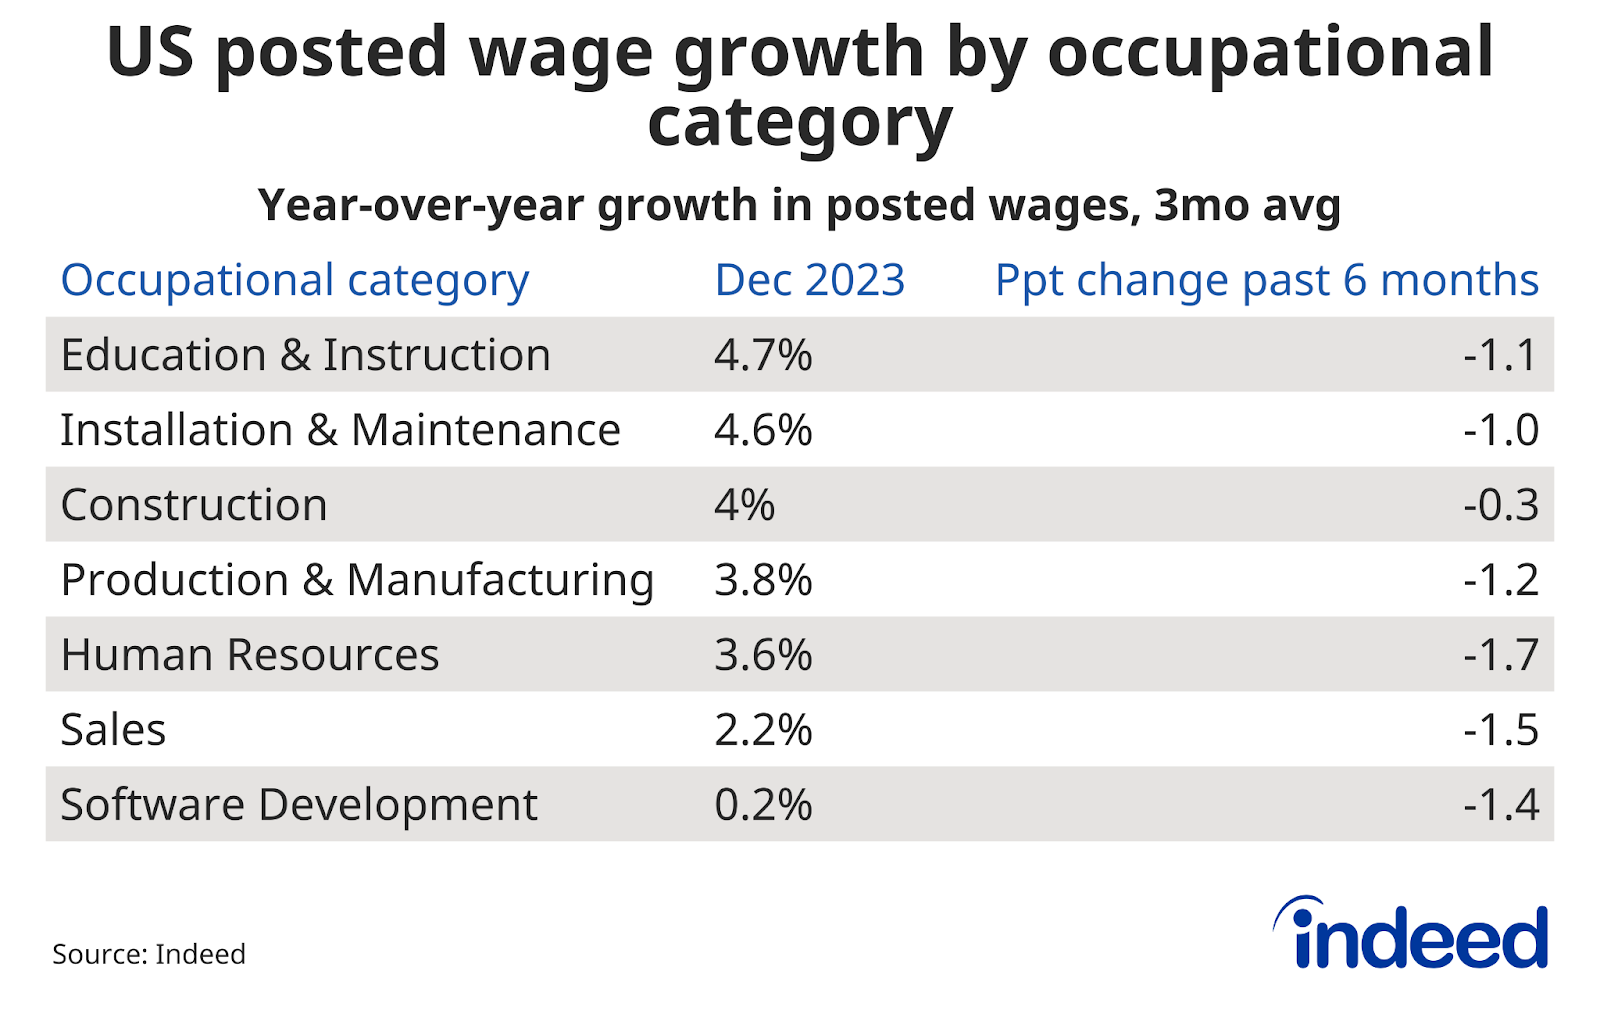 Table showing the year-over-year percent change in posted wages as of December 2023, and the percentage point change in the past six months, by job category. Production & Manufacturing and Software Development wages are growing at 3.8% and 0.2%, respectively, year-over-year. 